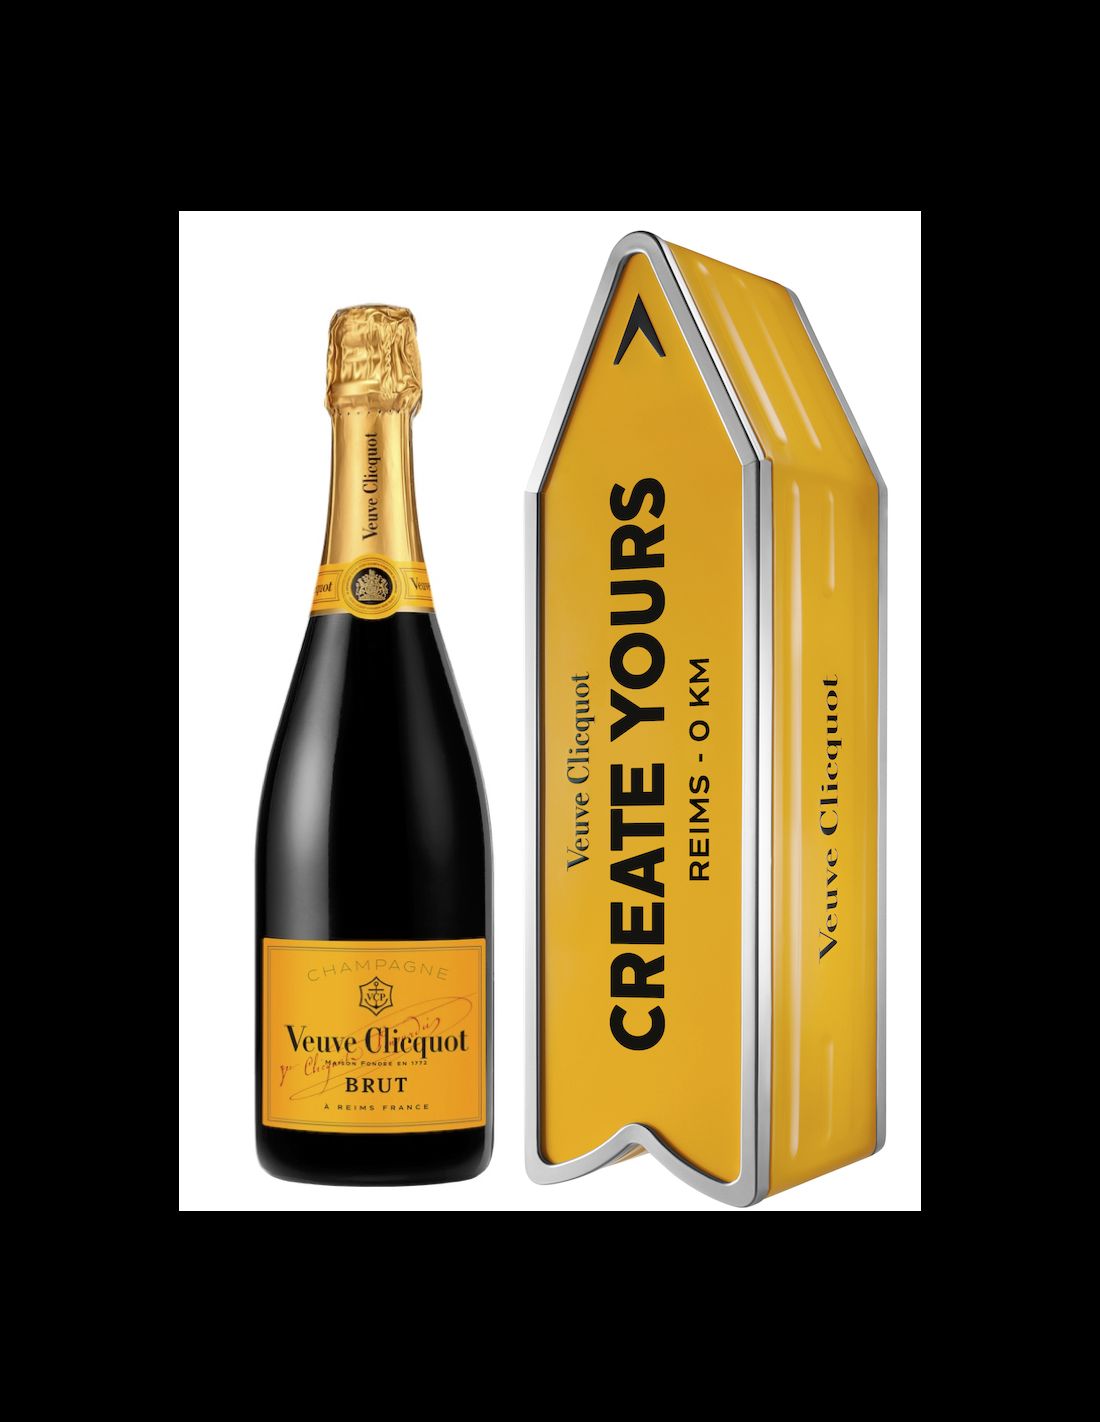 Check Out The Beautiful Packaging for Clicquot Arrow